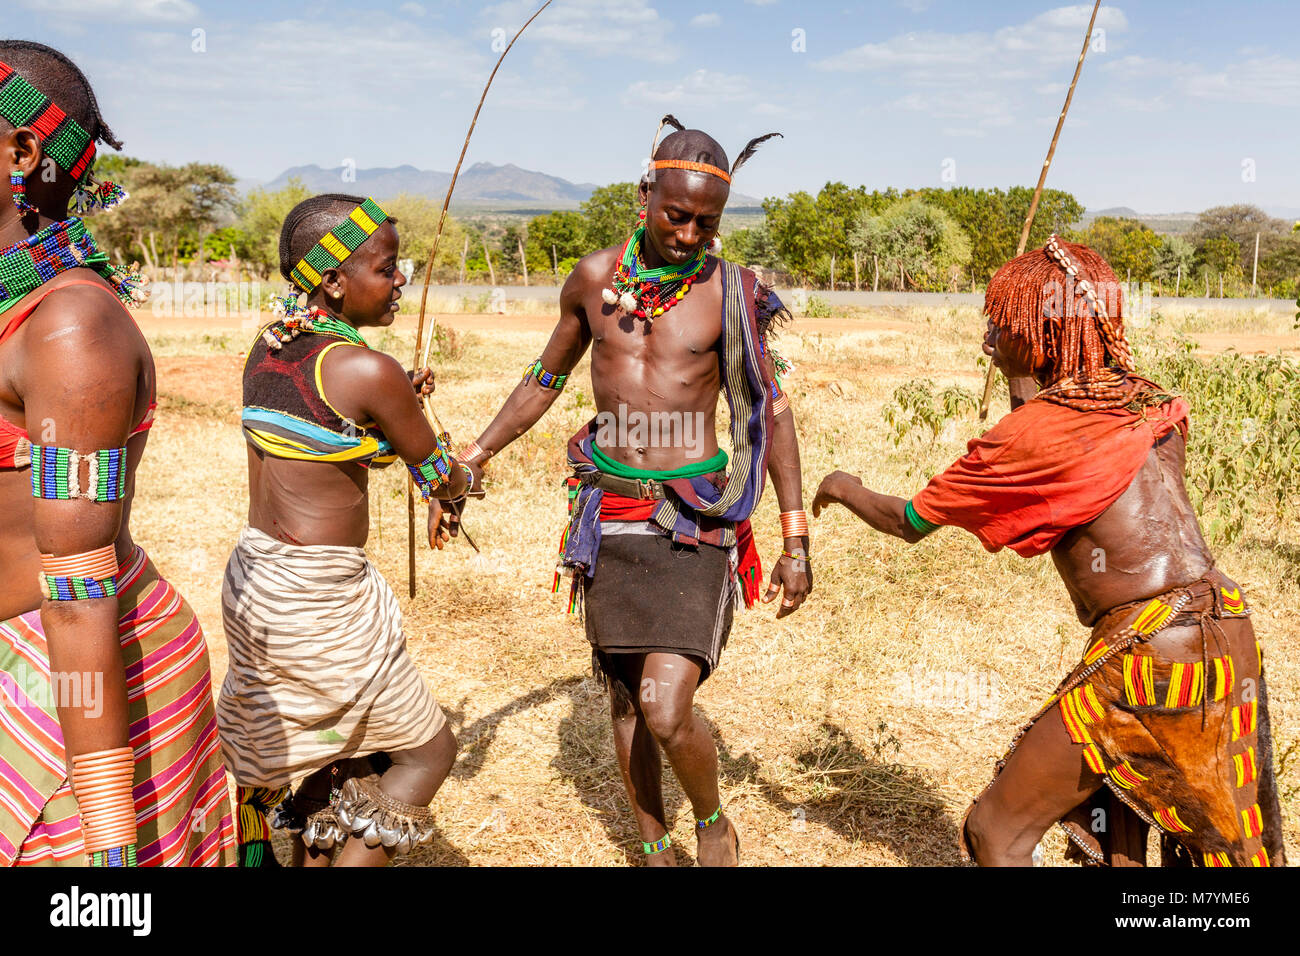 Young Hamar Women Taunt A Hamar Tribesman In To Whipping Them During A 'coming of age' Bull Jumping Ceremony, Dimeka, Omo Valley, Ethiopia Stock Photo